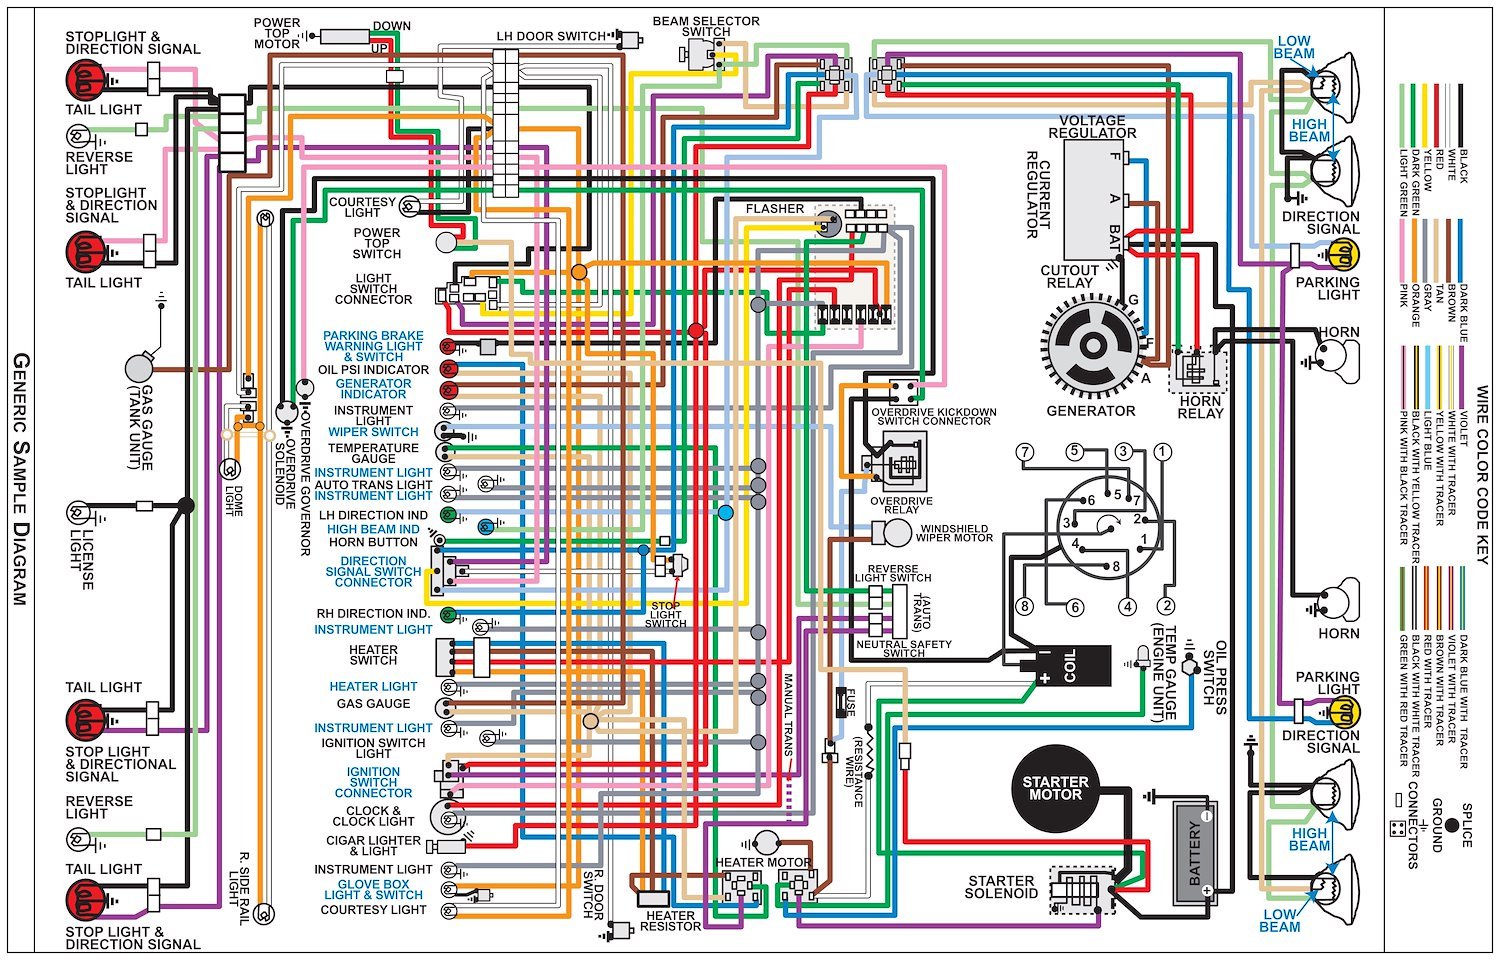 Wiring Diagram for 1972 Dodge Challenger with Standard